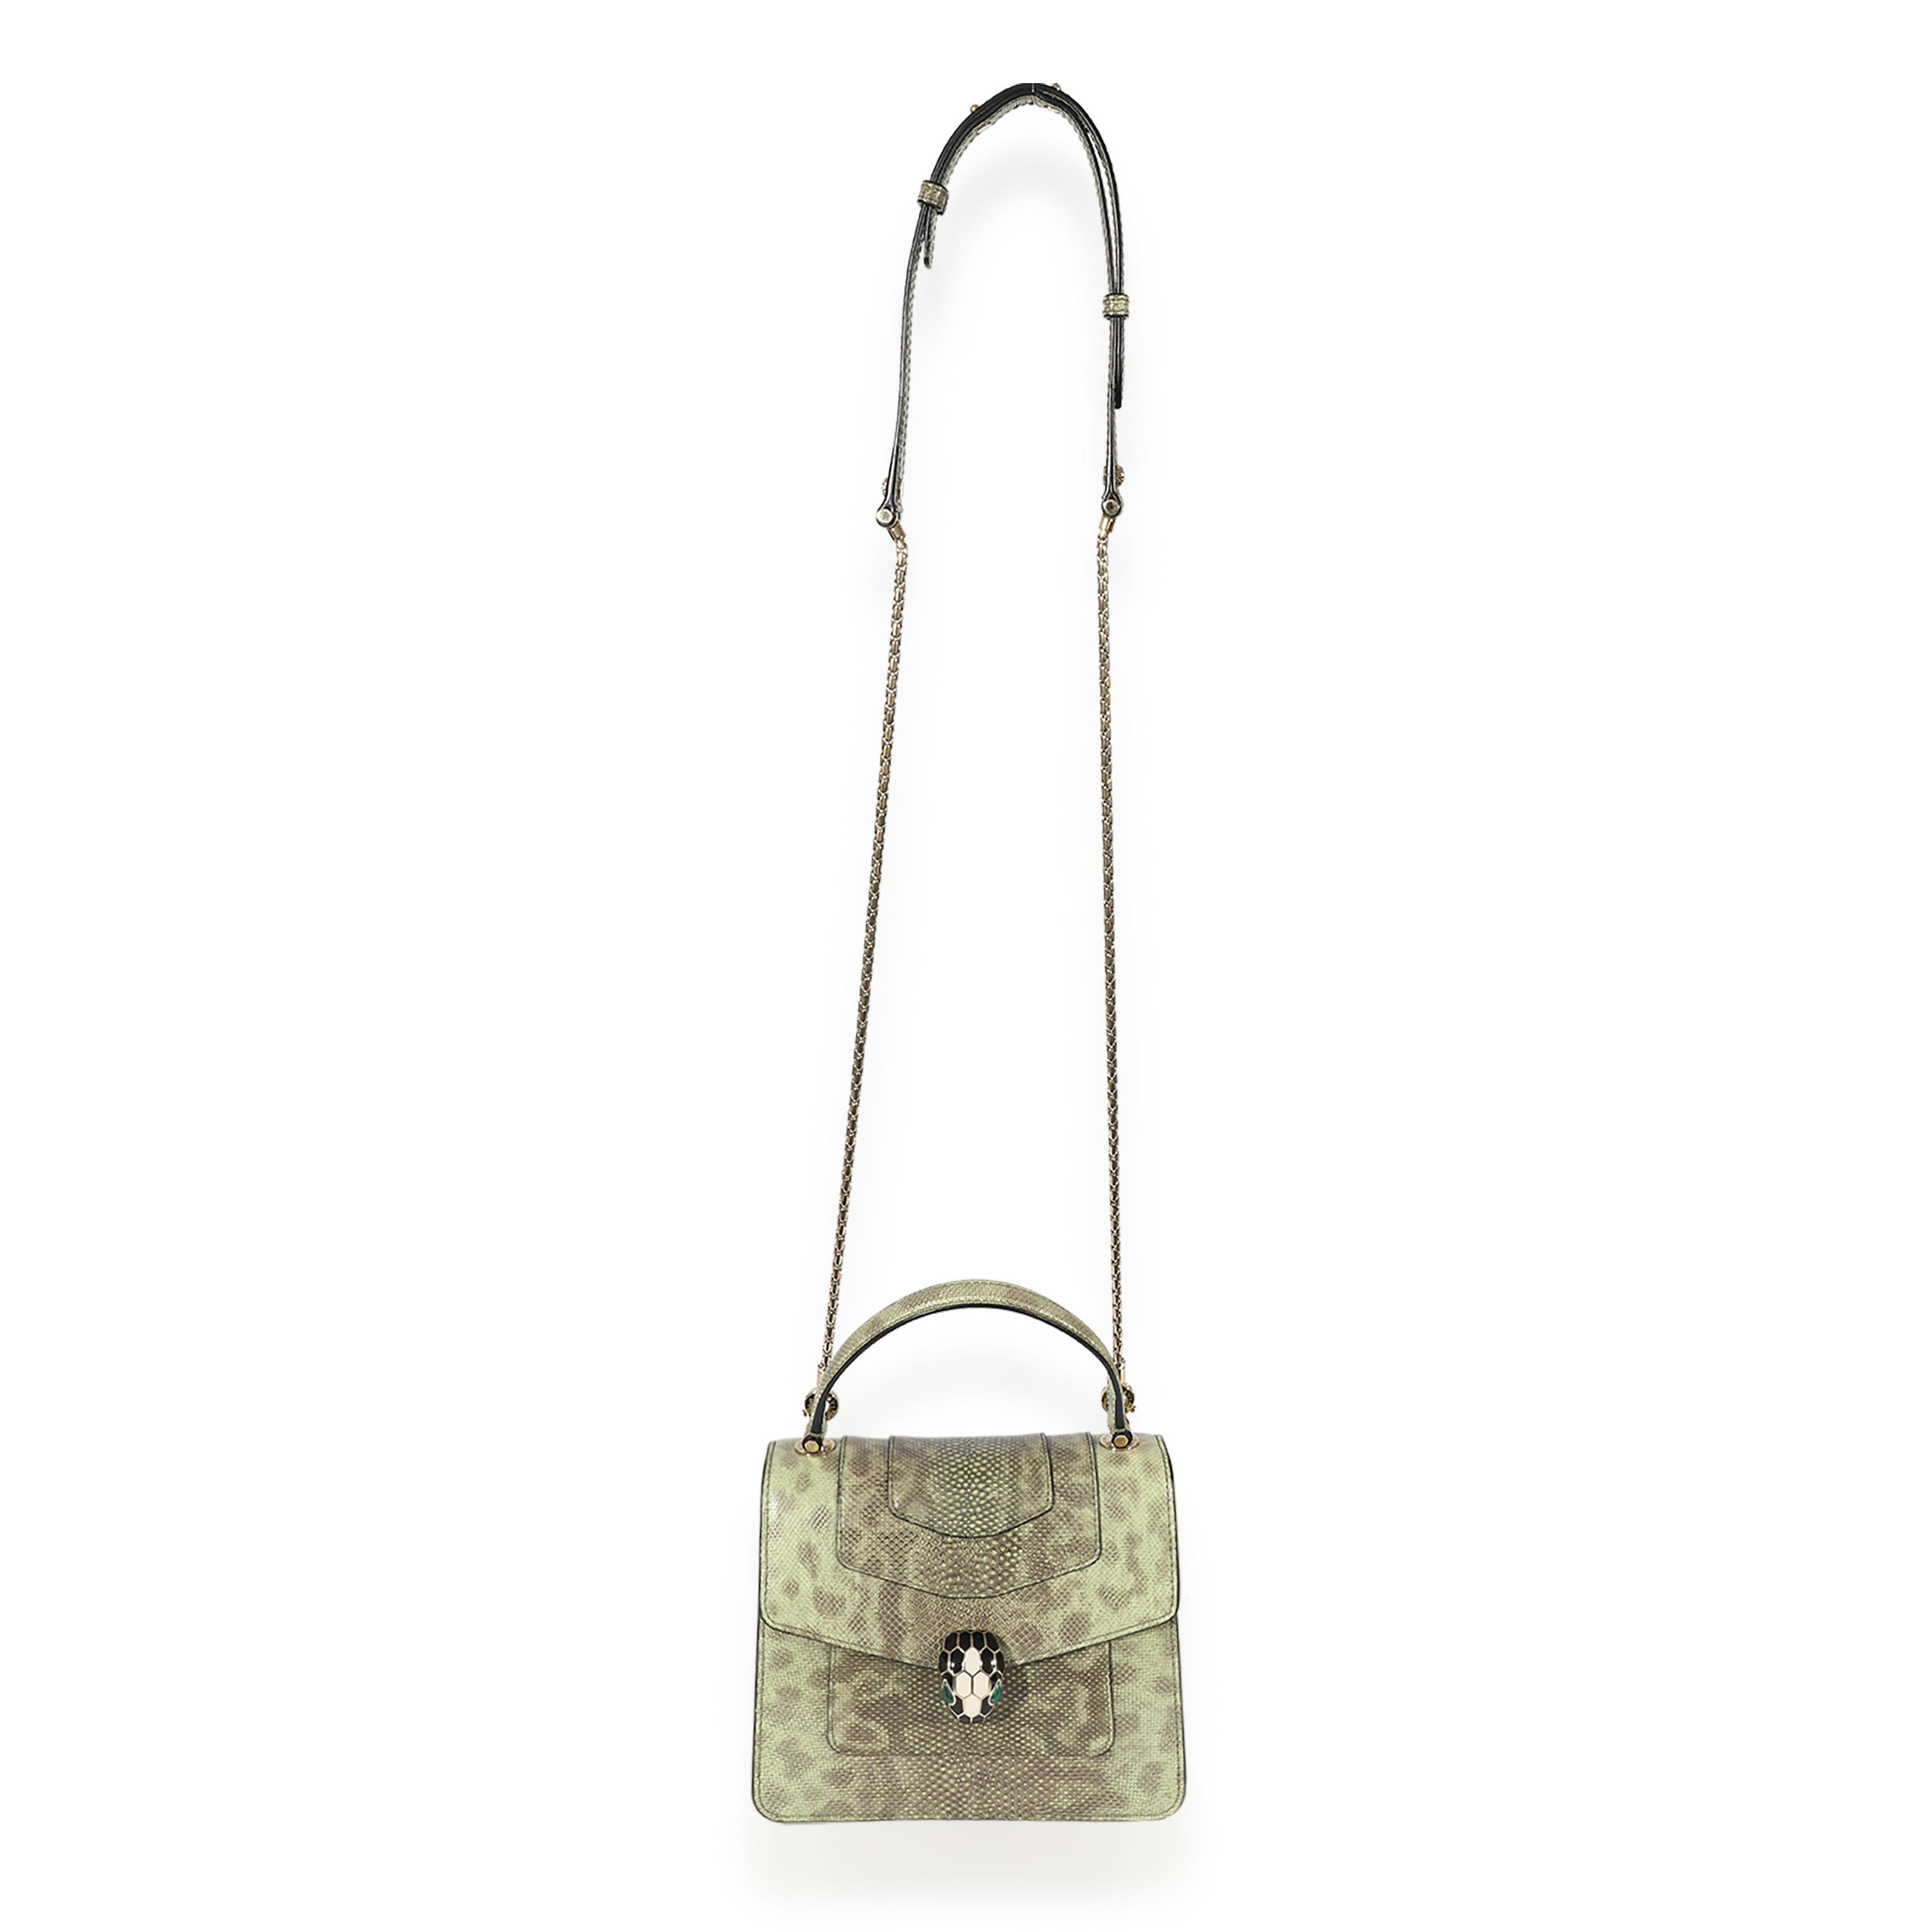 Listing Title: BVLGARI Karung Serpenti Forever Top Handle
SKU: 125199
MSRP: 4450.00
Condition: Pre-owned 
Handbag Condition: Very Good
Condition Comments: Very Good Condition. Exterior corner scuffing and throughout. Scratching at hardware. Interior